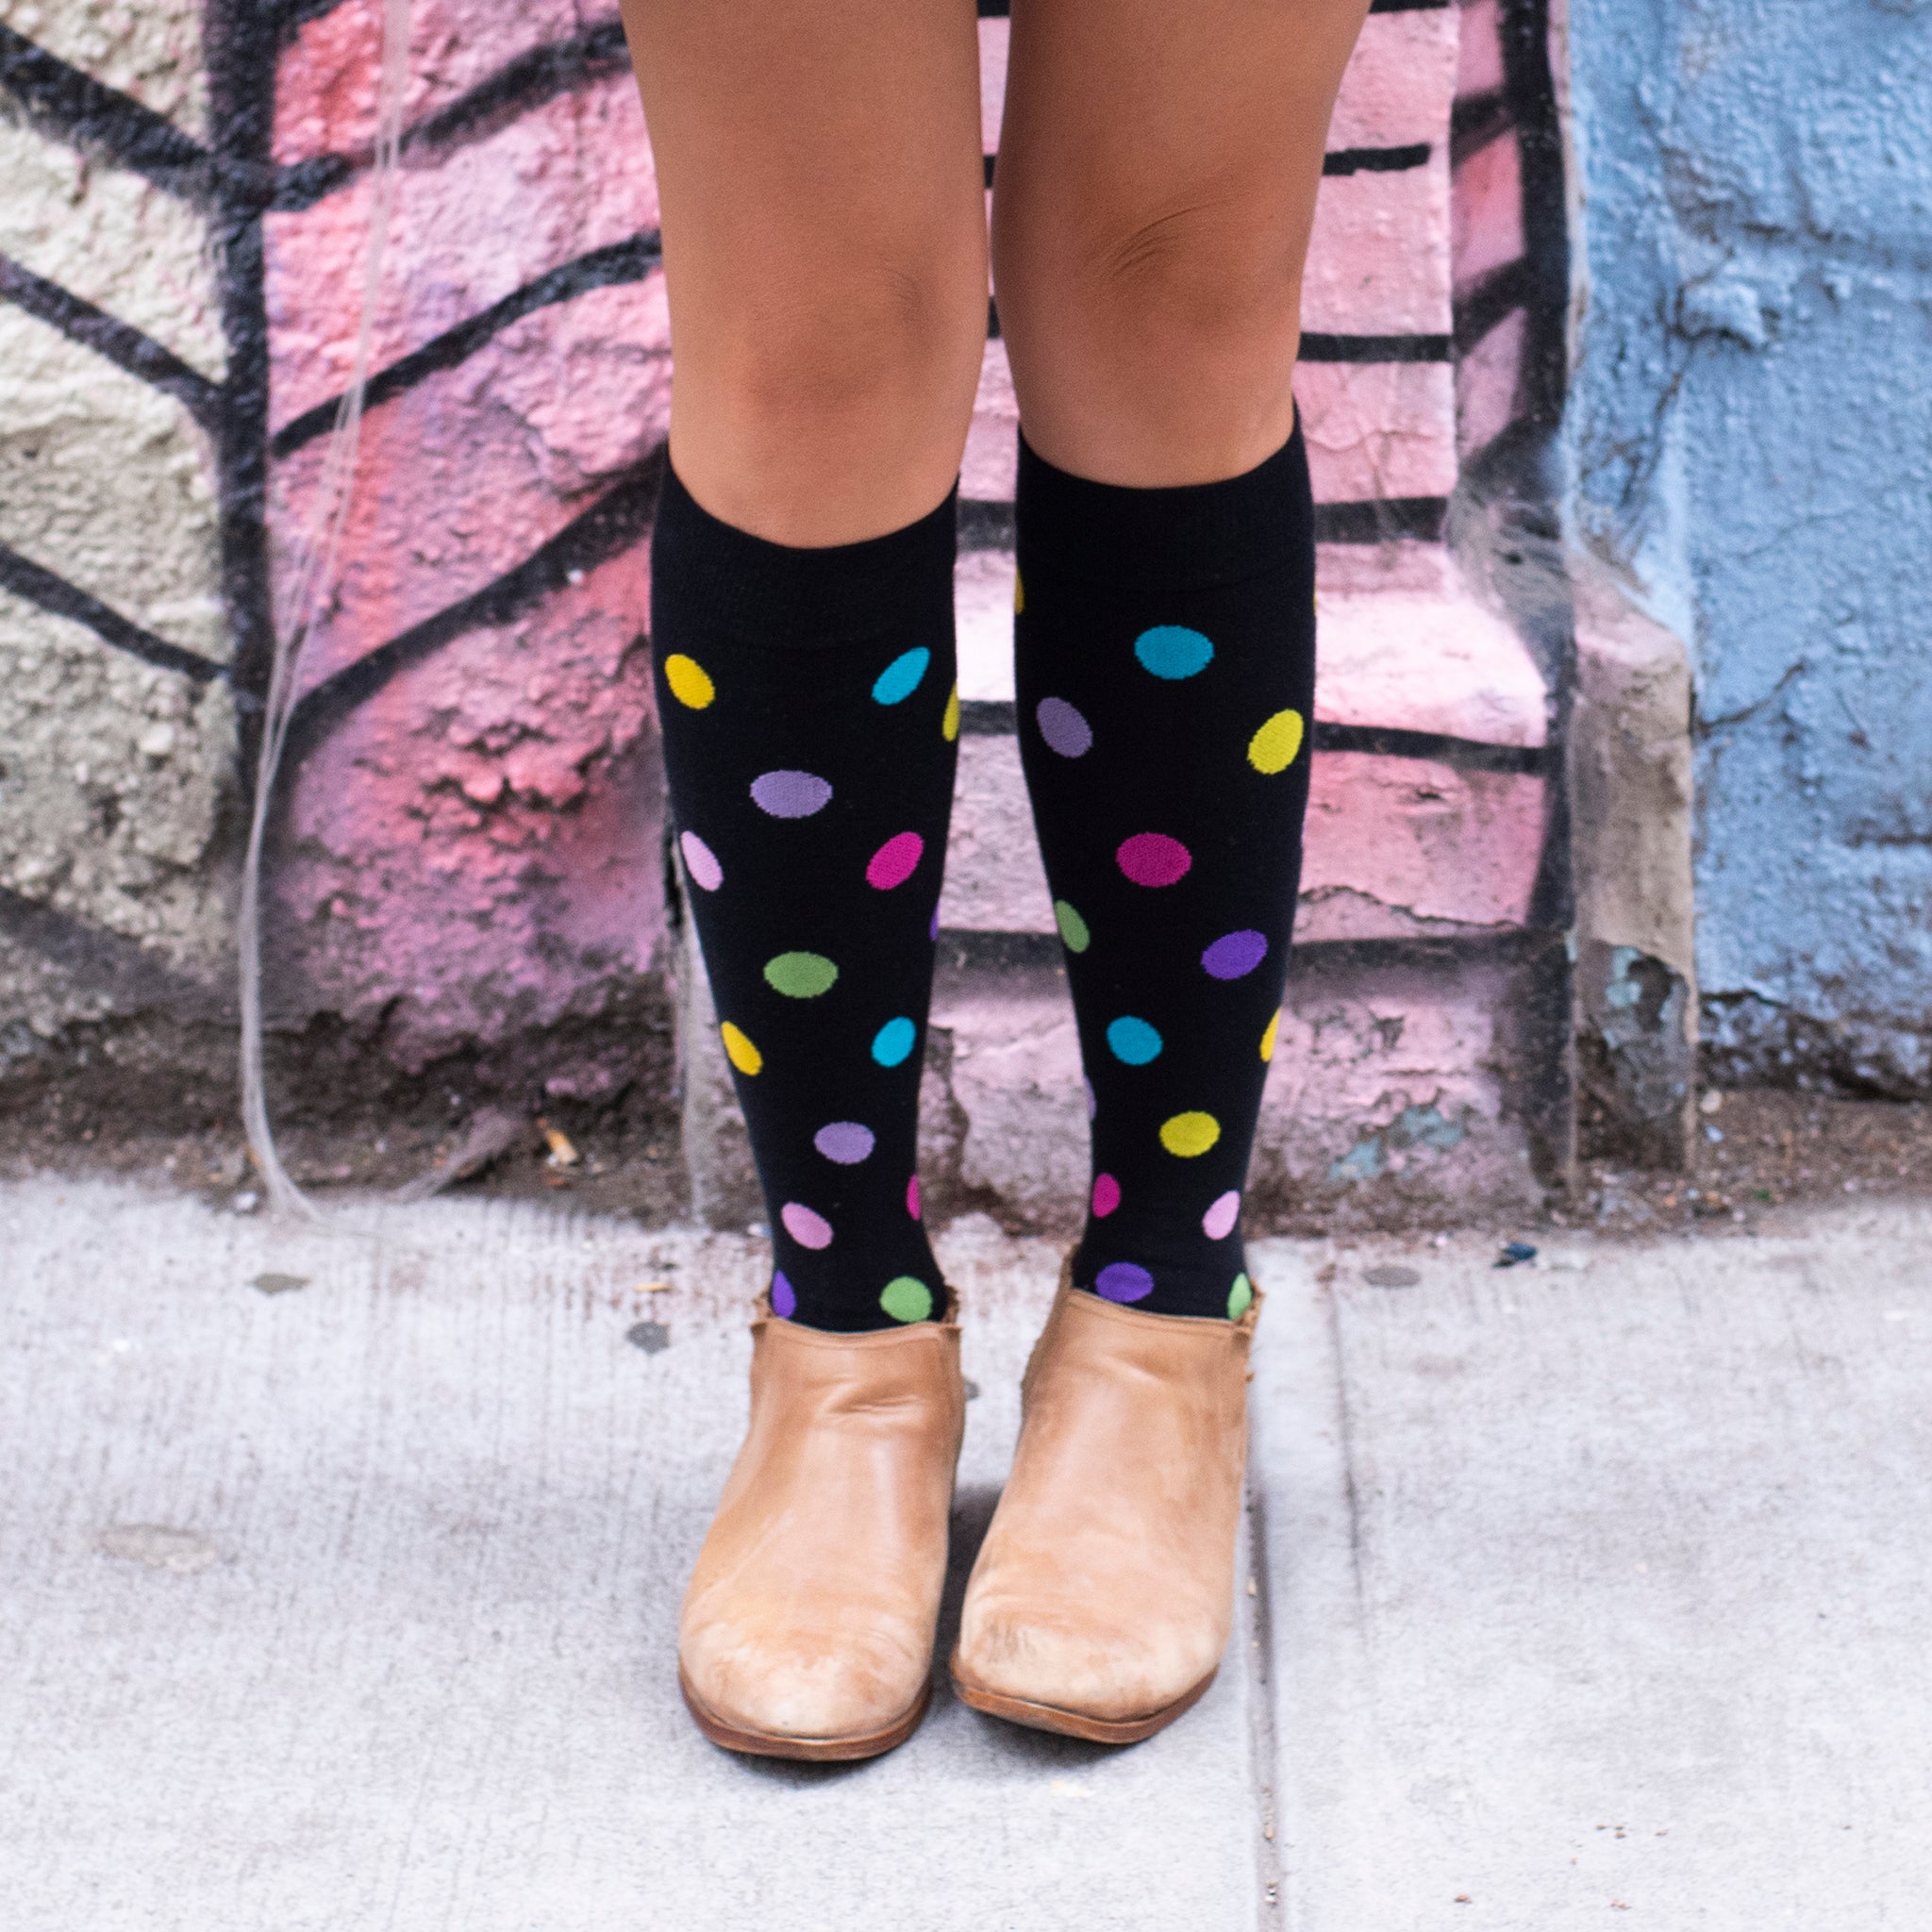 Fashion Sock Trends and Patterns for 2020 [Infographic]